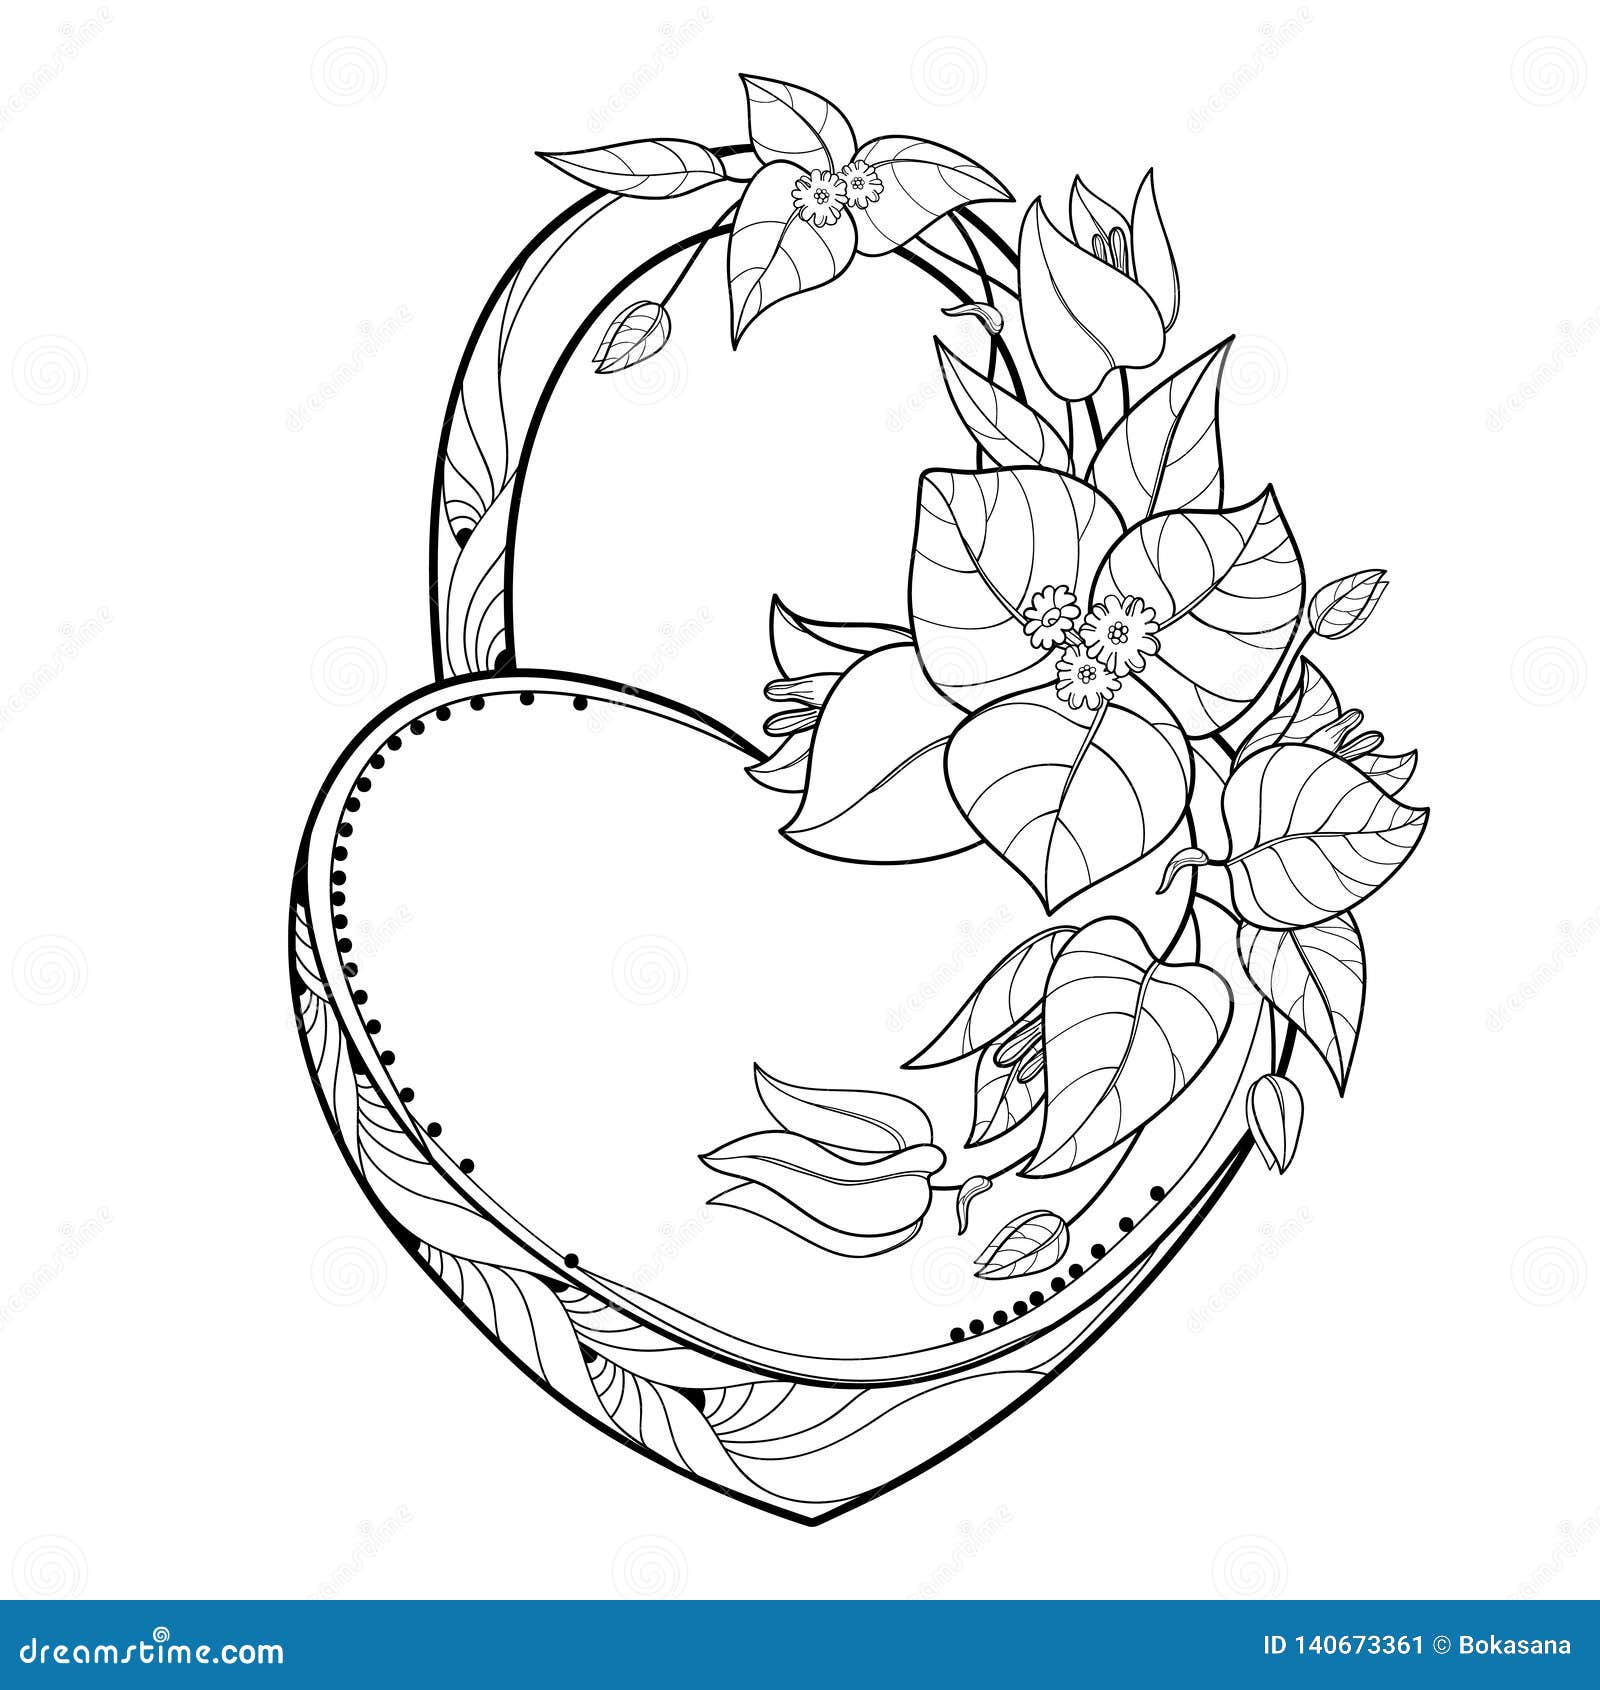  padlock heart with outline bunch bougainvillea or buganvilla flower, leaf and bud in black  on white background.